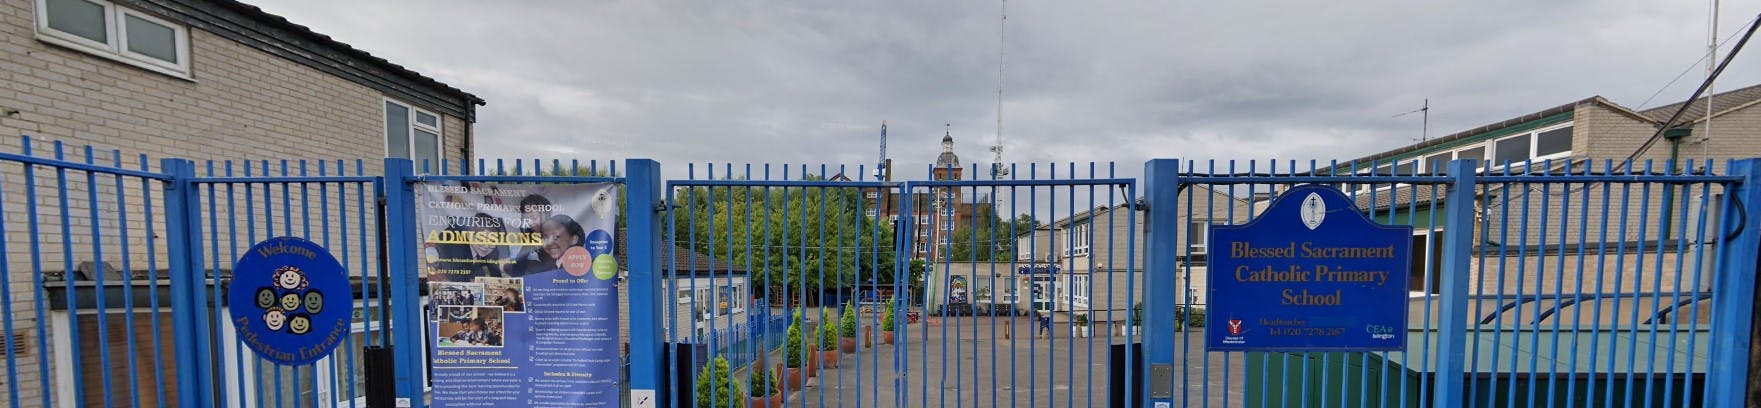 Blessed Sacrament Primary School entrance